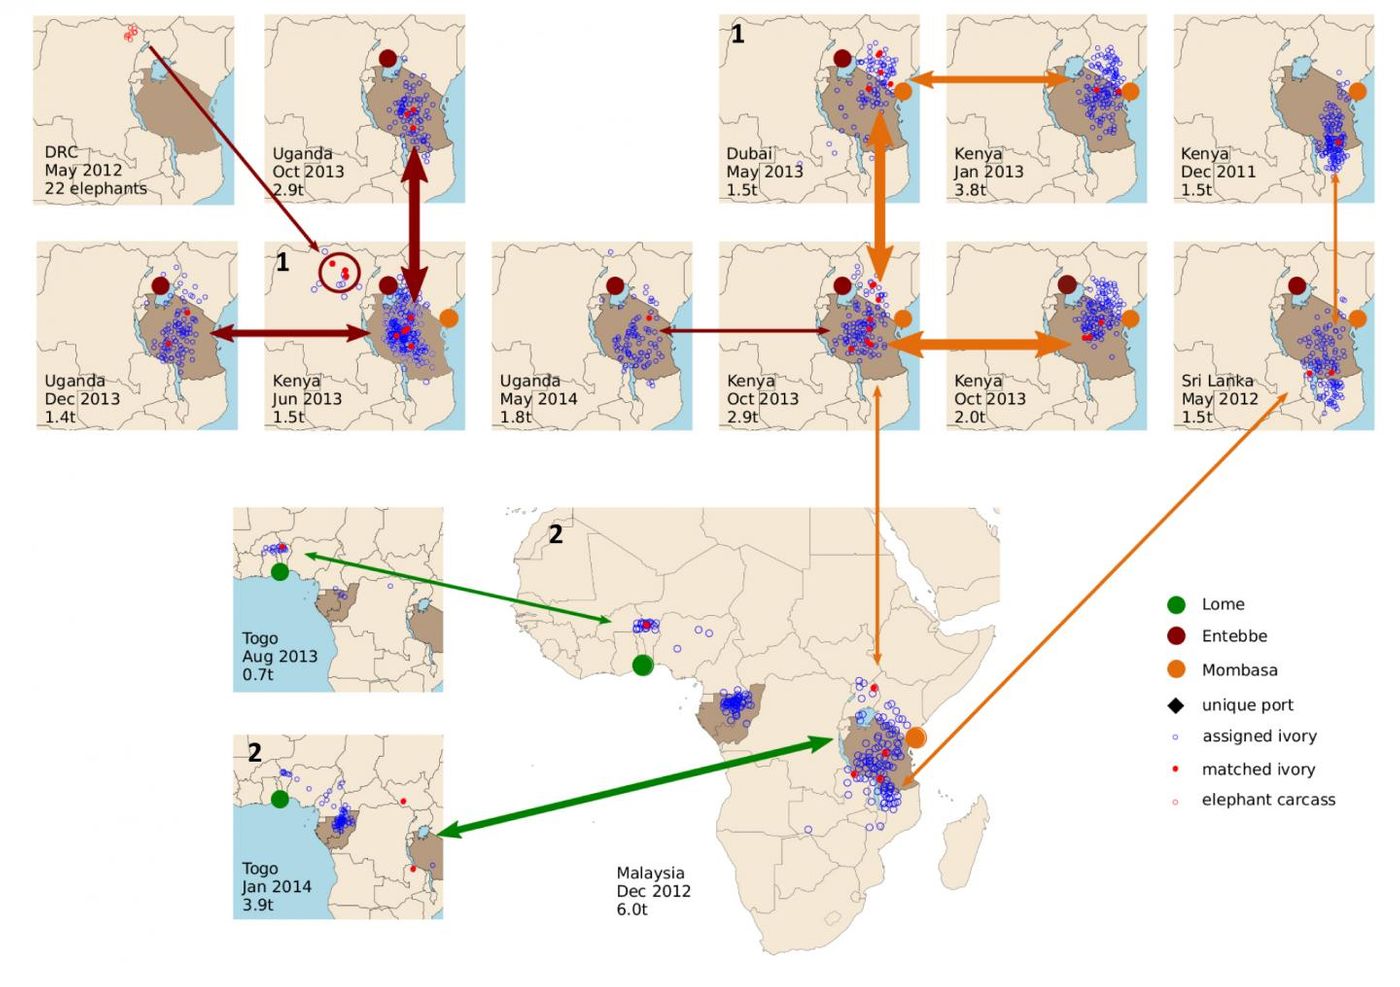 Wasser and his team are able to link multiple ivory shipments to the same smugglers. Each map indicates separate shipments, with the location, date and weight of the seizure shown in the lower left.  / Credit: Wasser et al. 2018/Science Advances